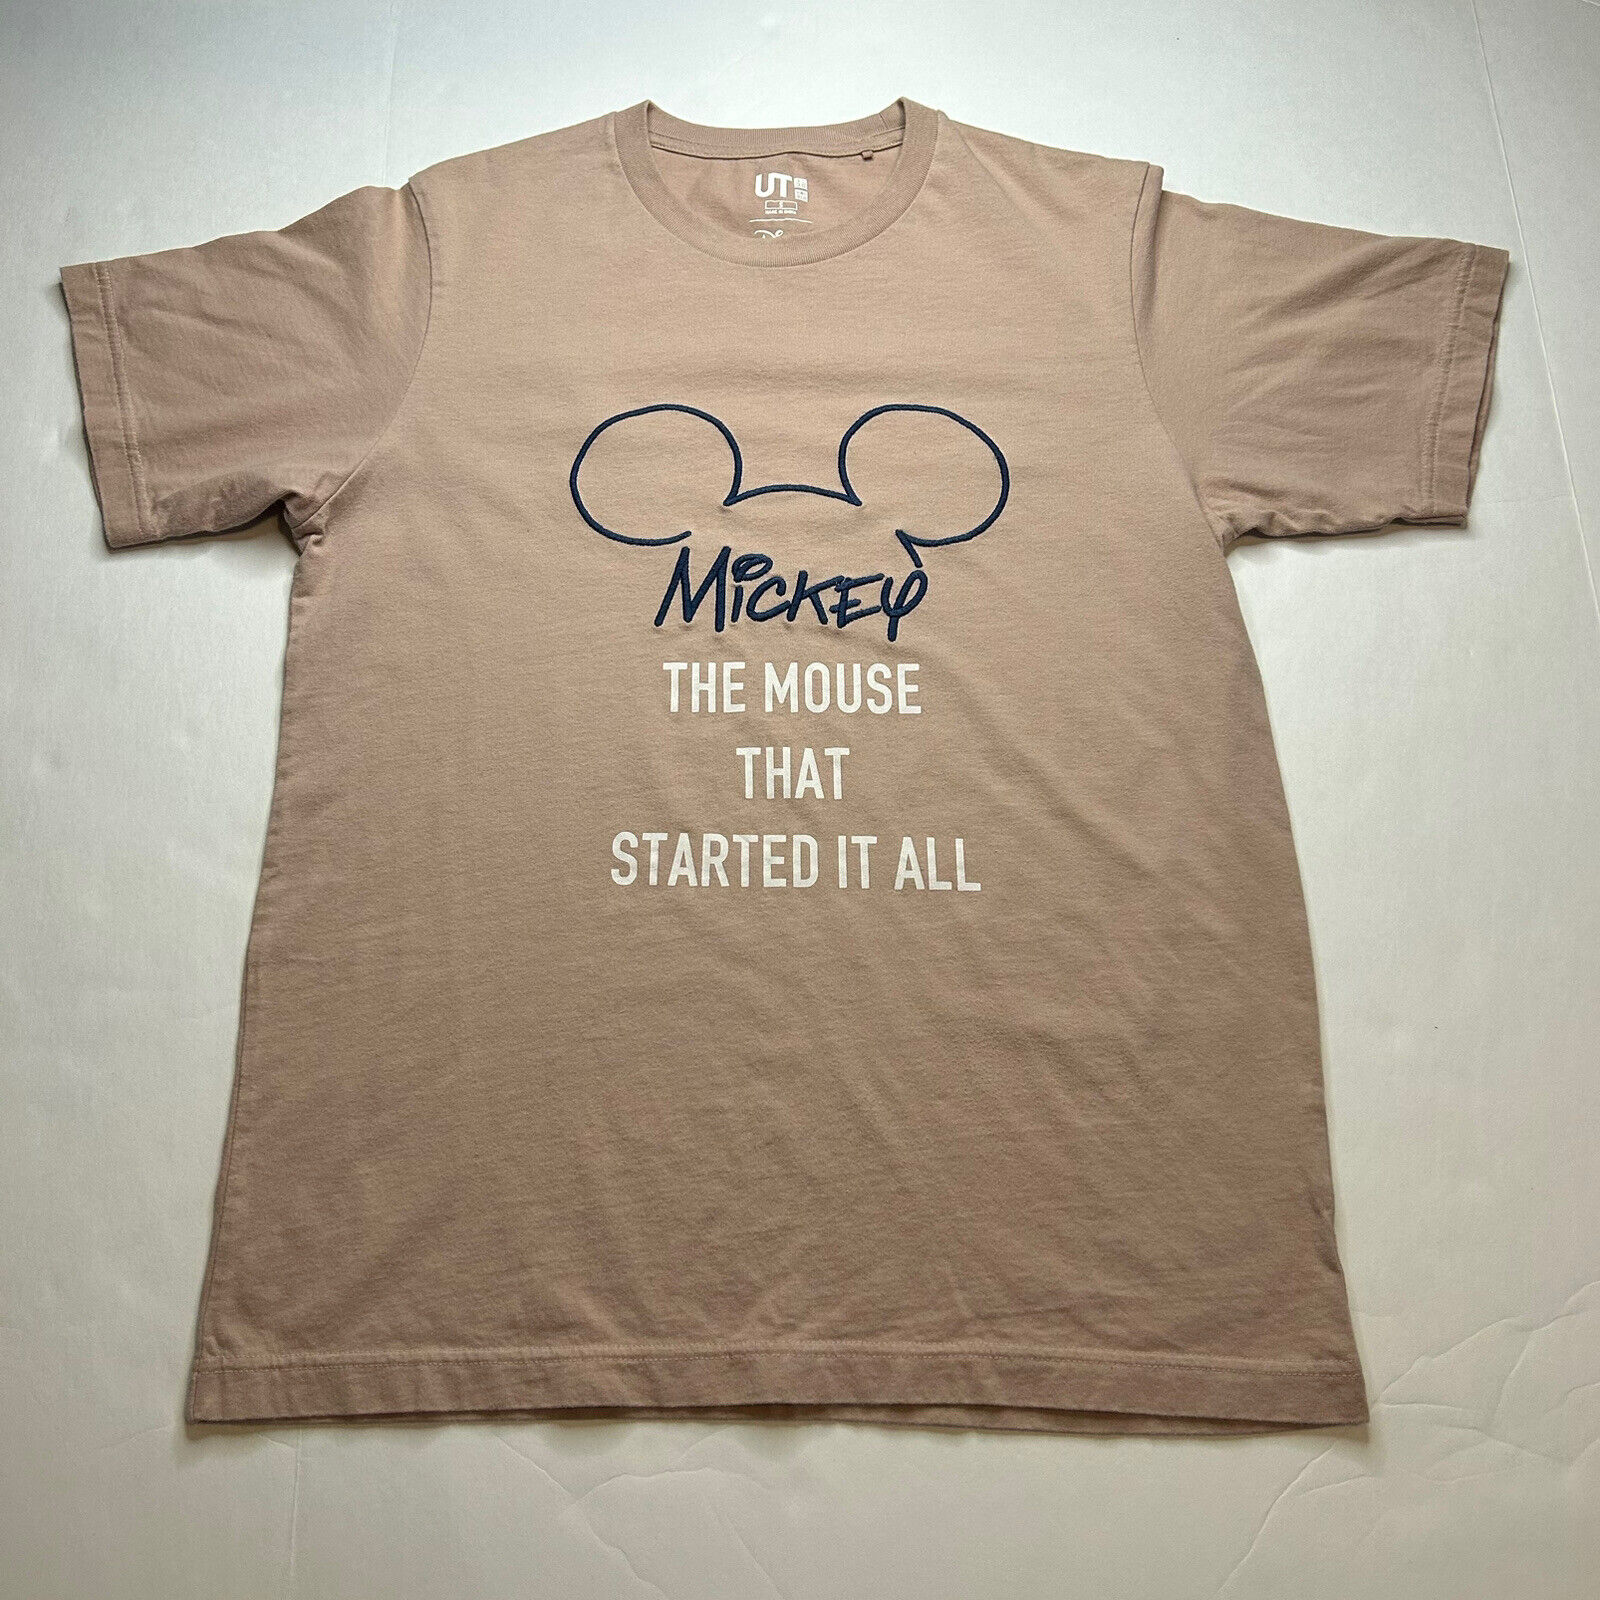 Uniqlo Disney “Mickey the mouse that started it all” T-Shirt Size Small